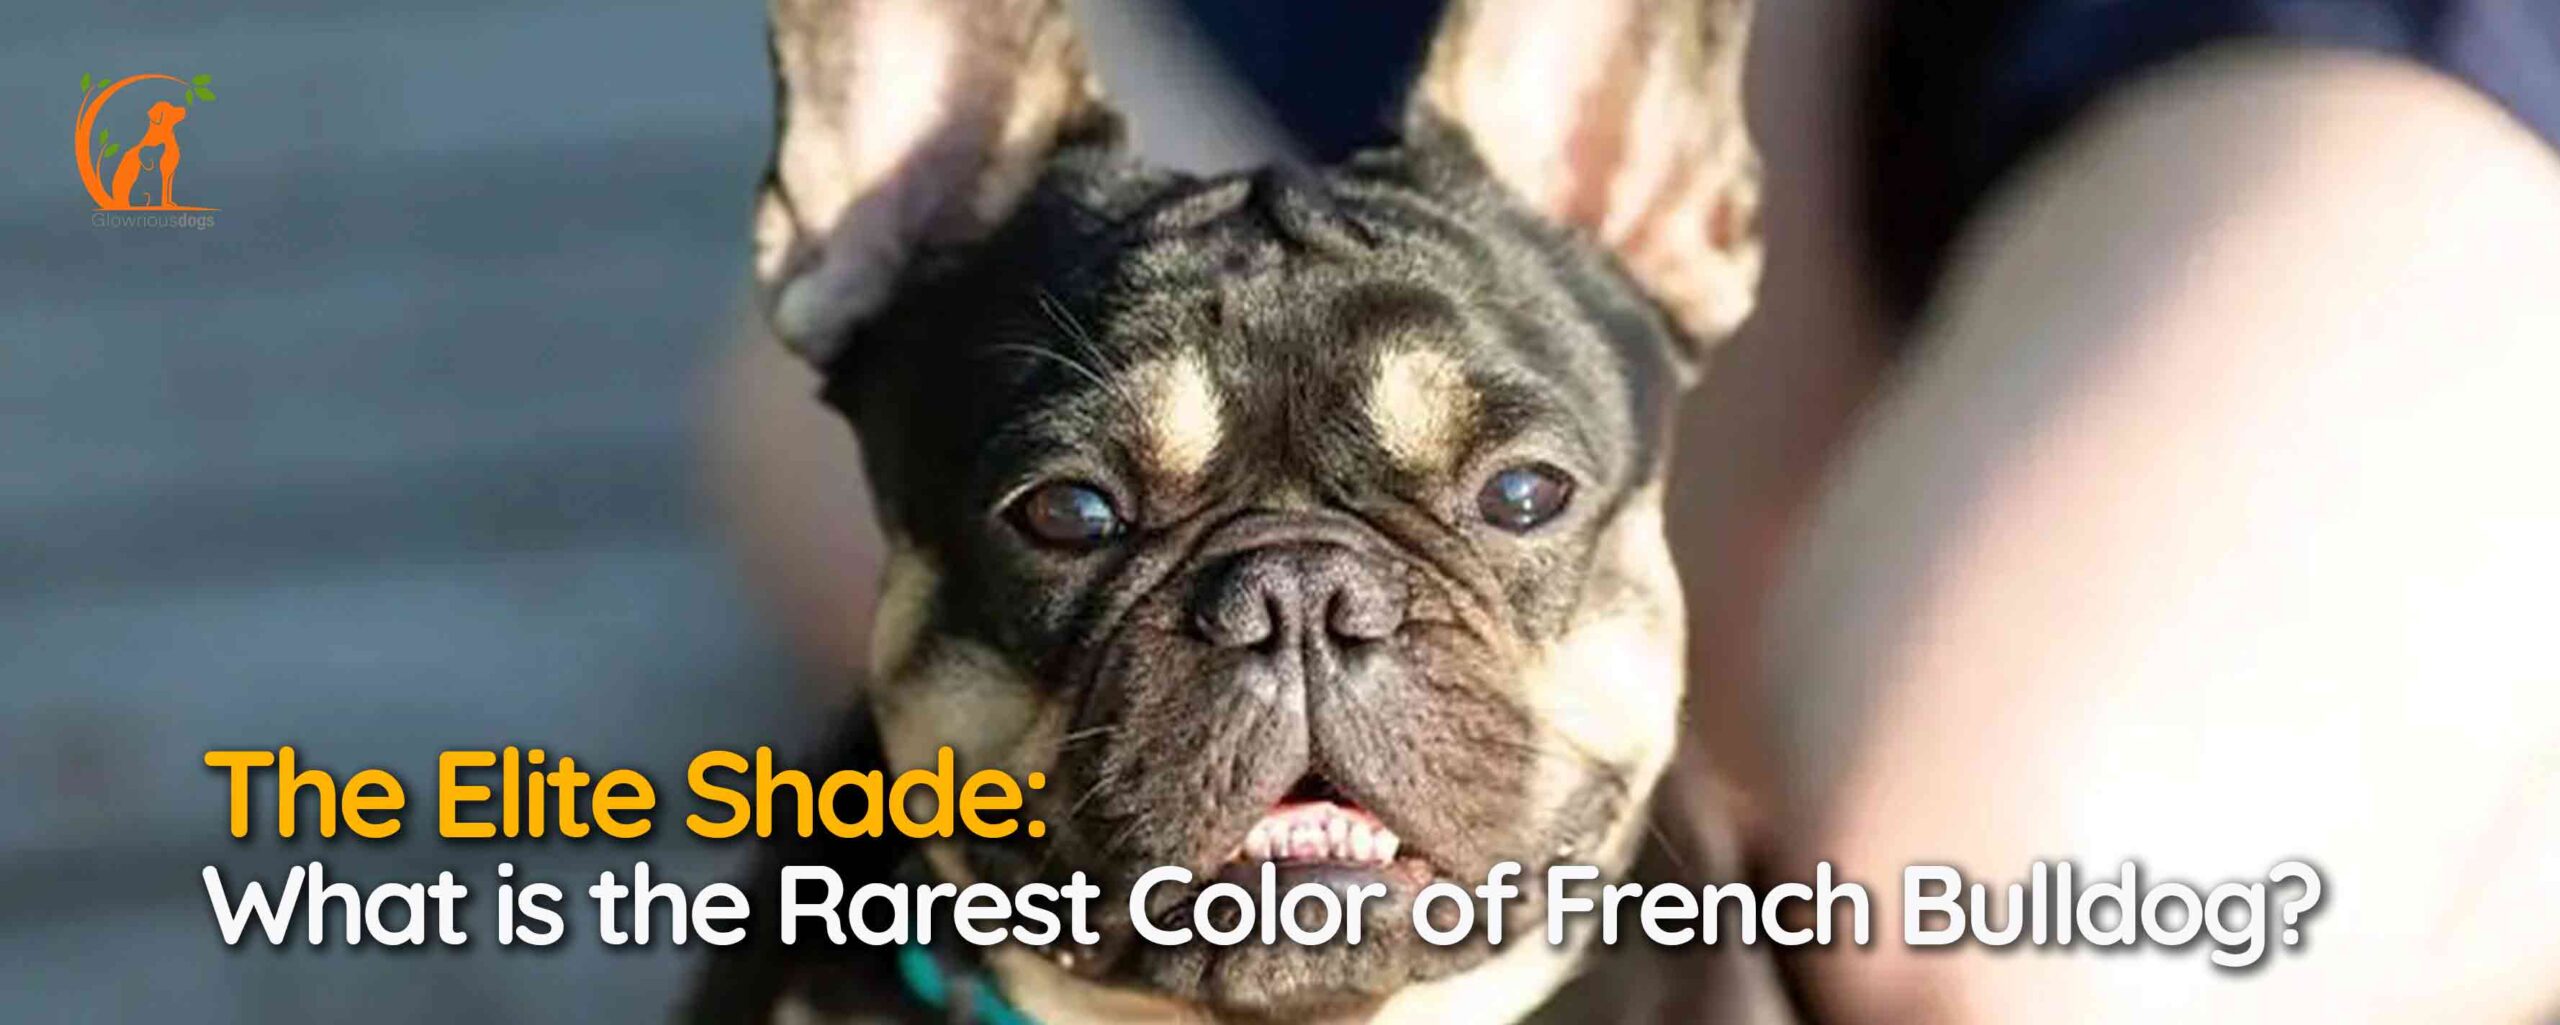 The Elite Shade: What is the Rarest Color of French Bulldog?